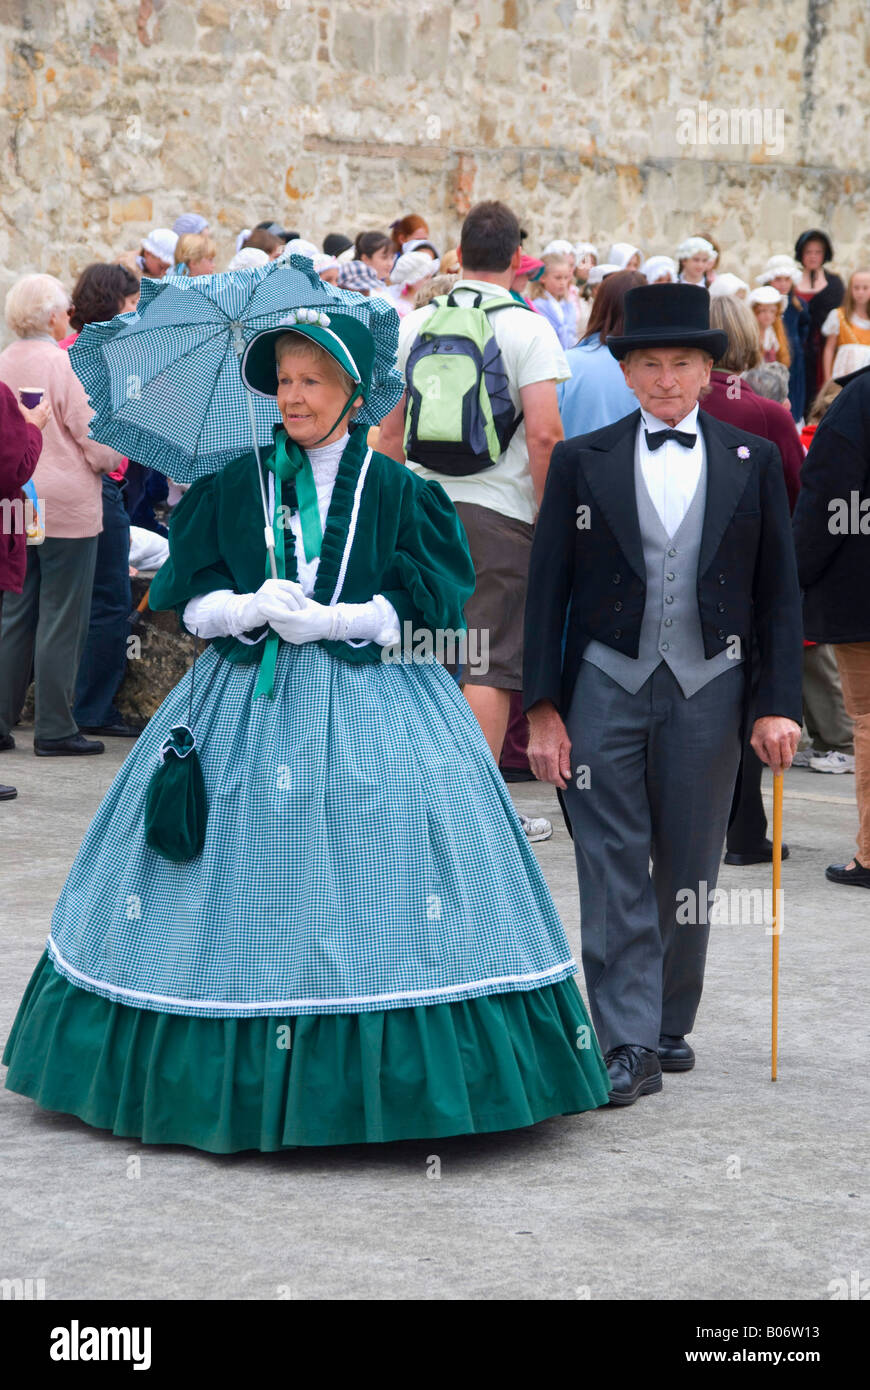 A man and woman in period clothing add atmosphere to an event held at the old prison in Hobart Tasmania Stock Photo